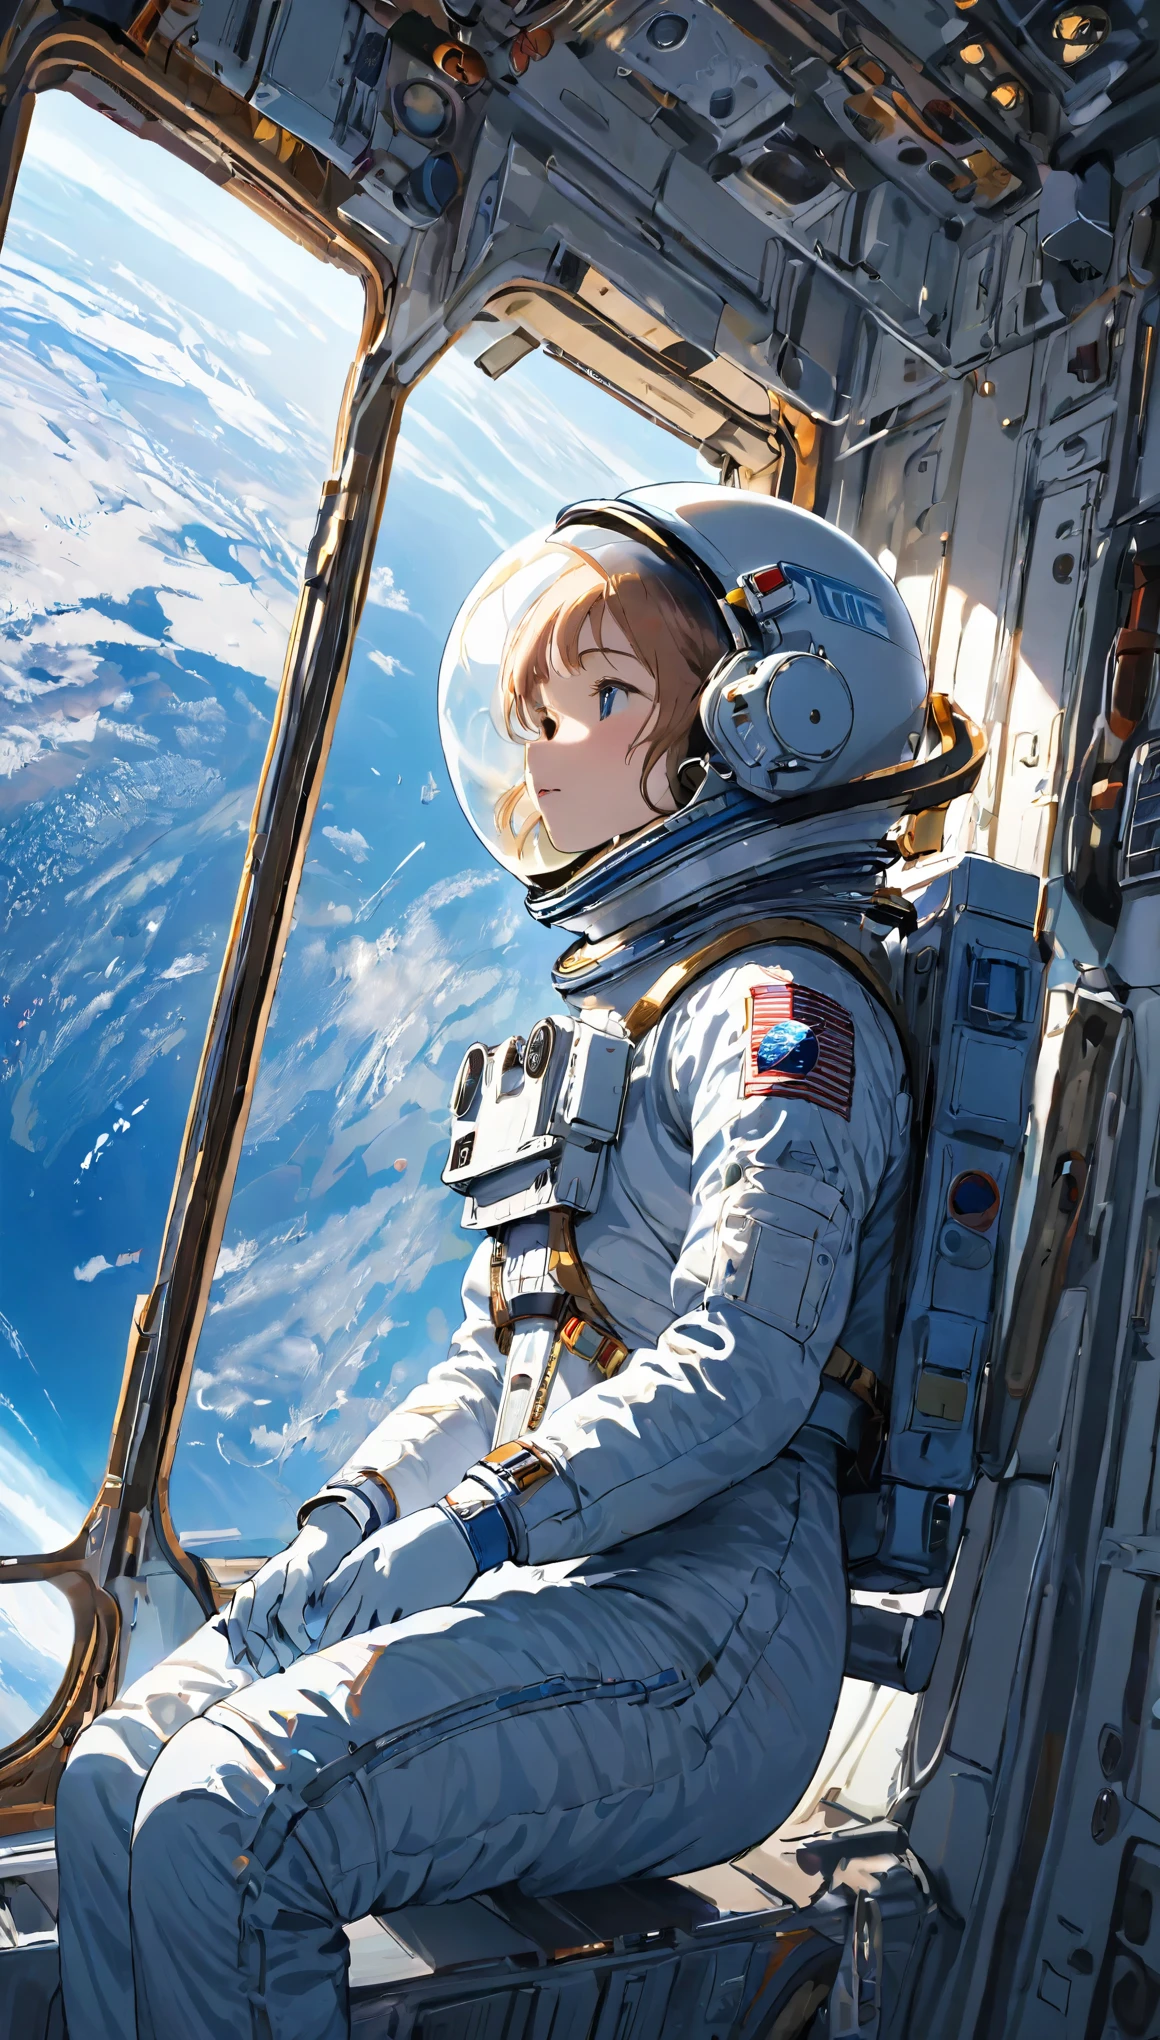 Highest quality、masterpiece、High resolution、RAW Photos、BREAK、Perfect Anatomy、One Girl、Reflective helmet、Wearing a helmet、Skin-tight astronaut suits、２０talent、Zero Gravity Swimming、Space Station、Experimental building、Complex Instrumentation、Detailed depiction、Space Station of the Near Future、BREAK、Earth seen from the window、Beautiful Earth、Blue Earth、